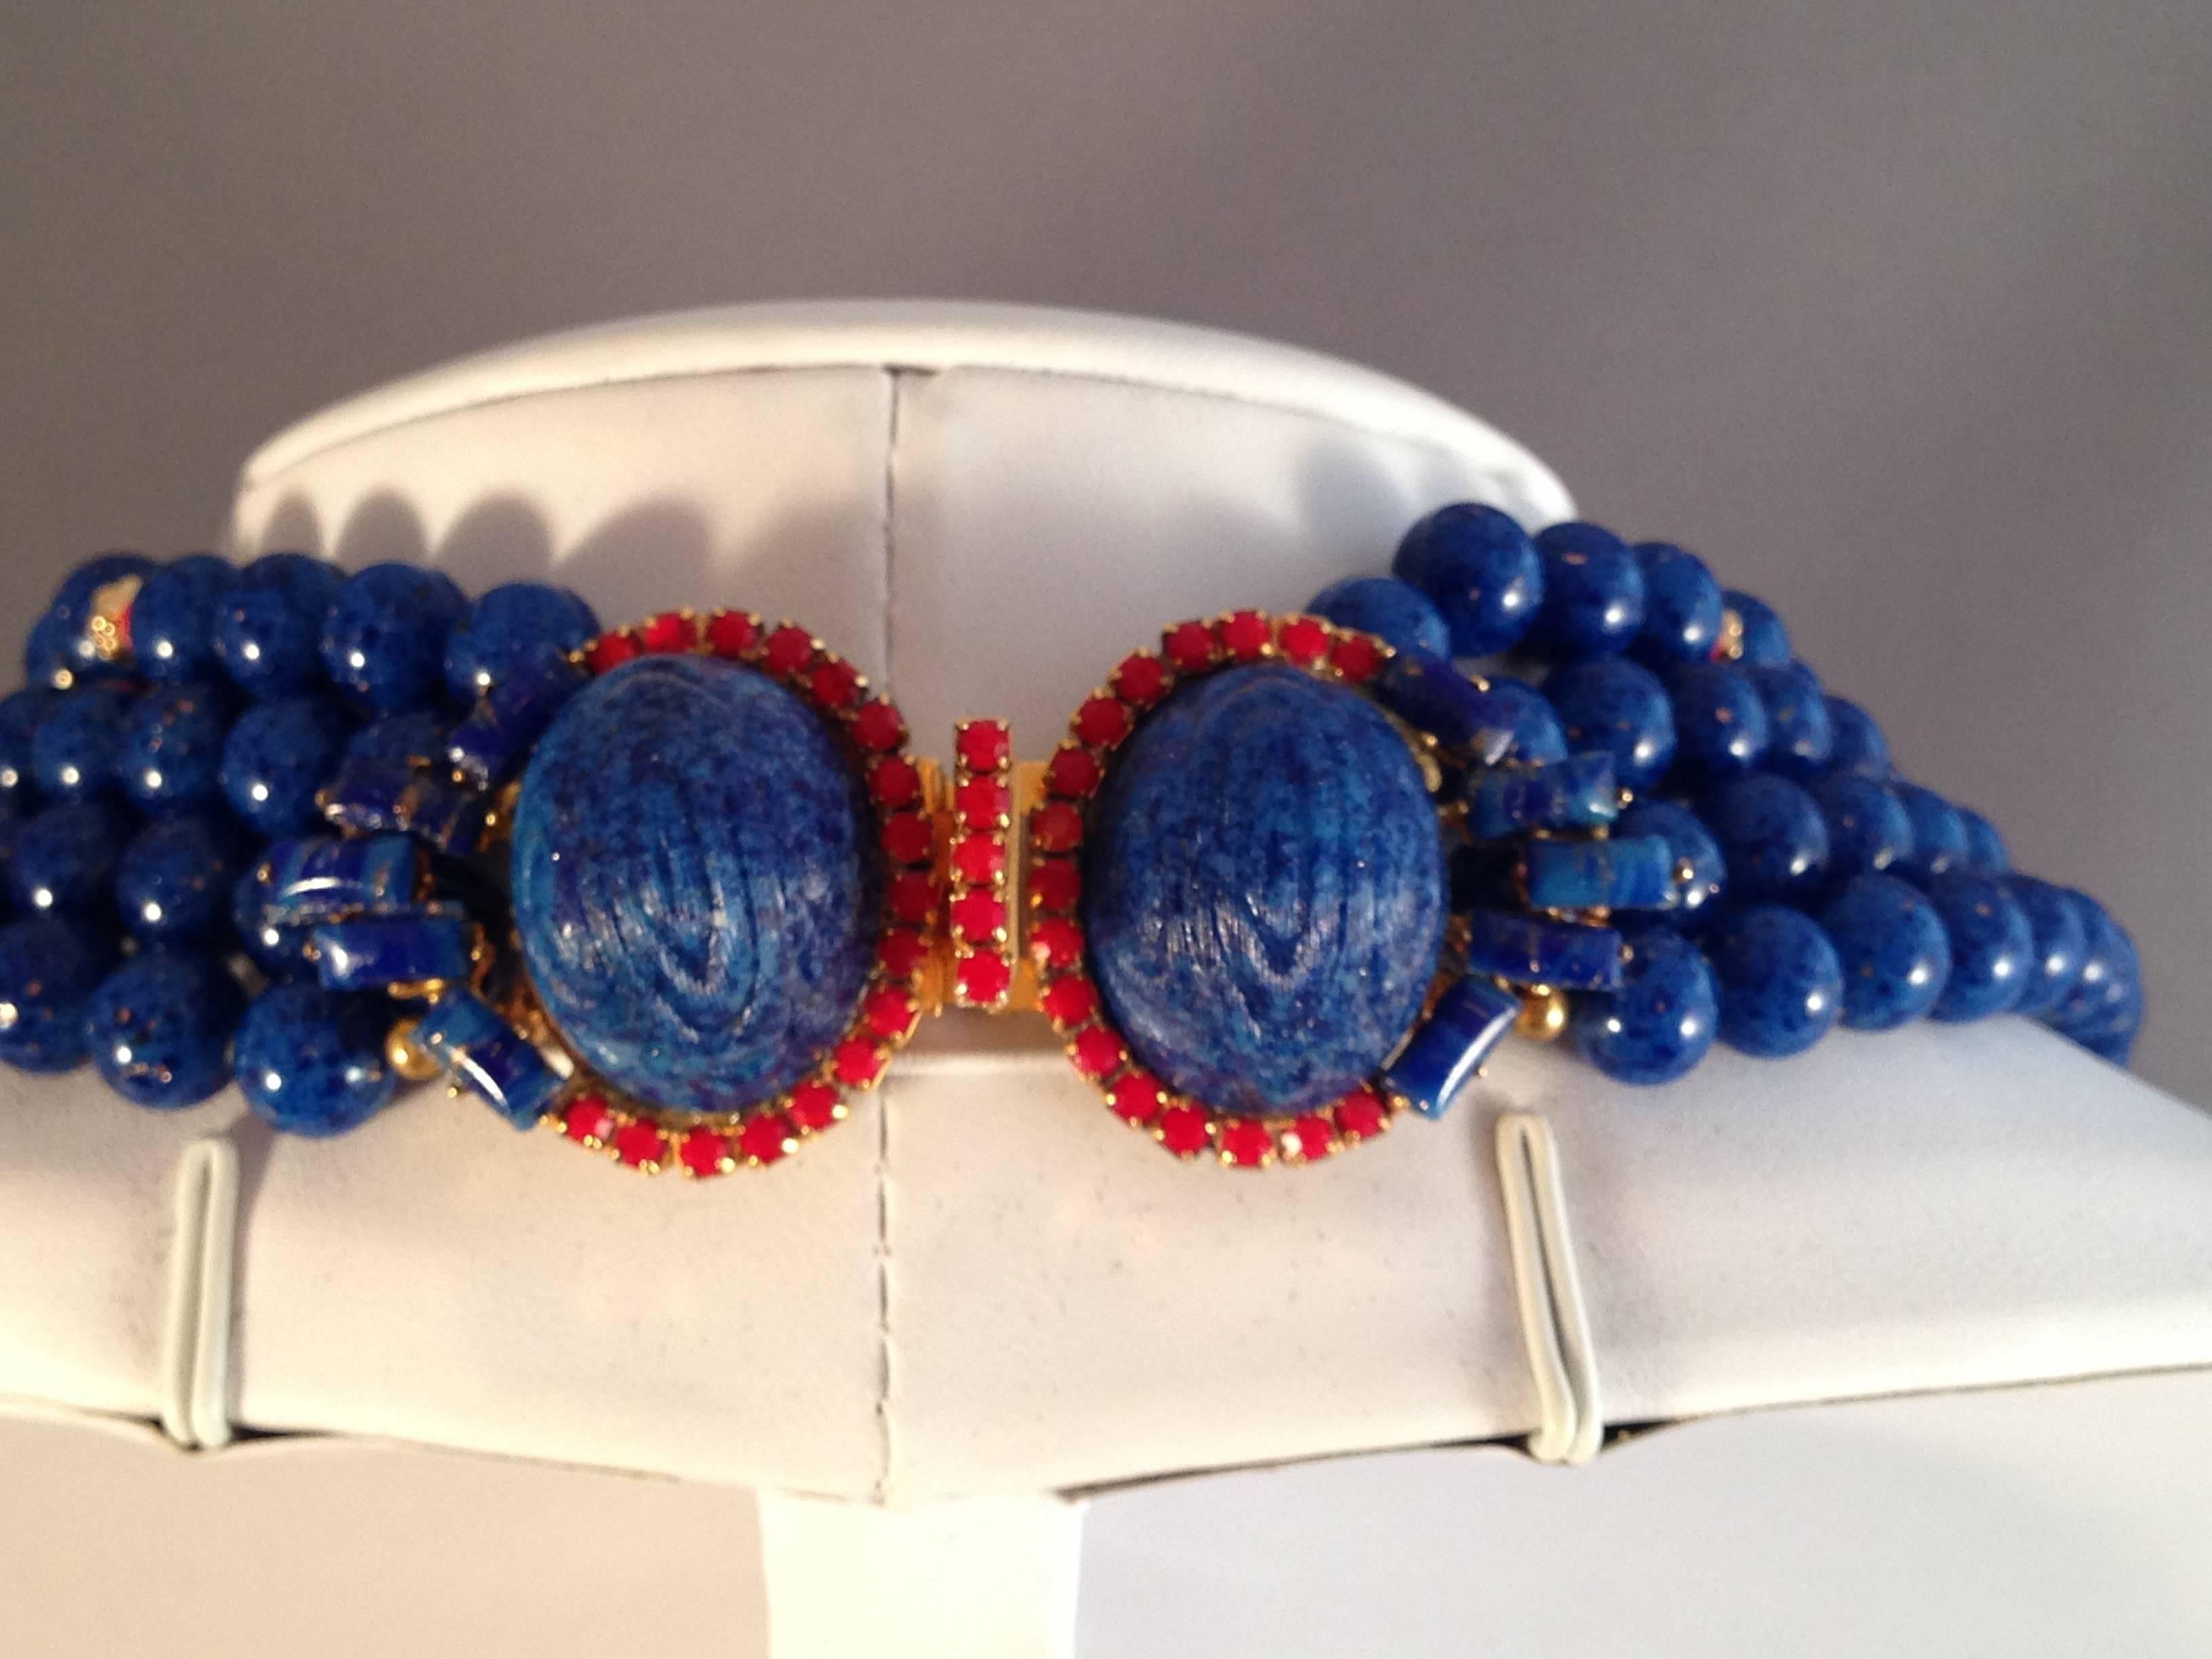 Willian De Lillo Necklace 1971 Blue and Red Beads 2